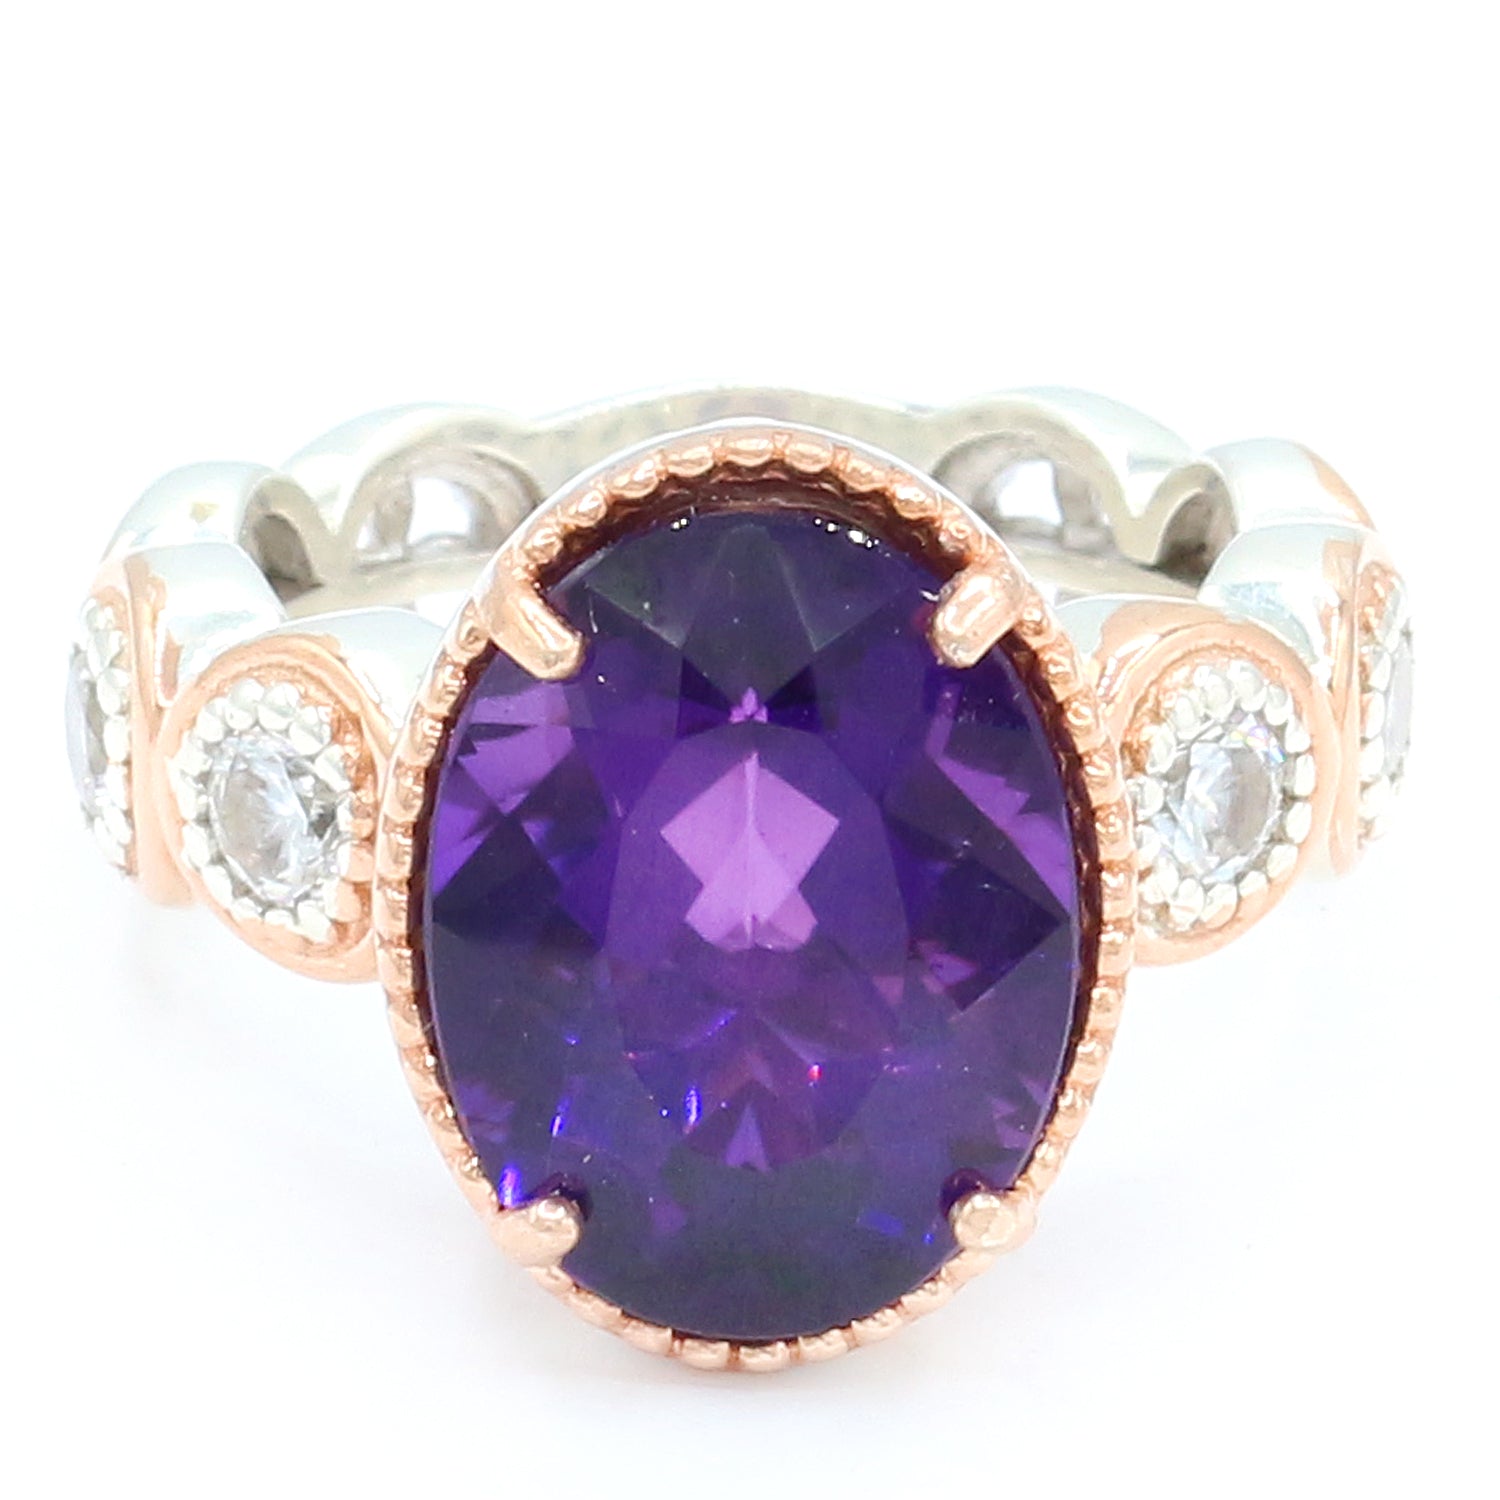 Gems en Vogue One-of-a-kind 5.50ctw Namibian Amethyst & White Zircon Ring